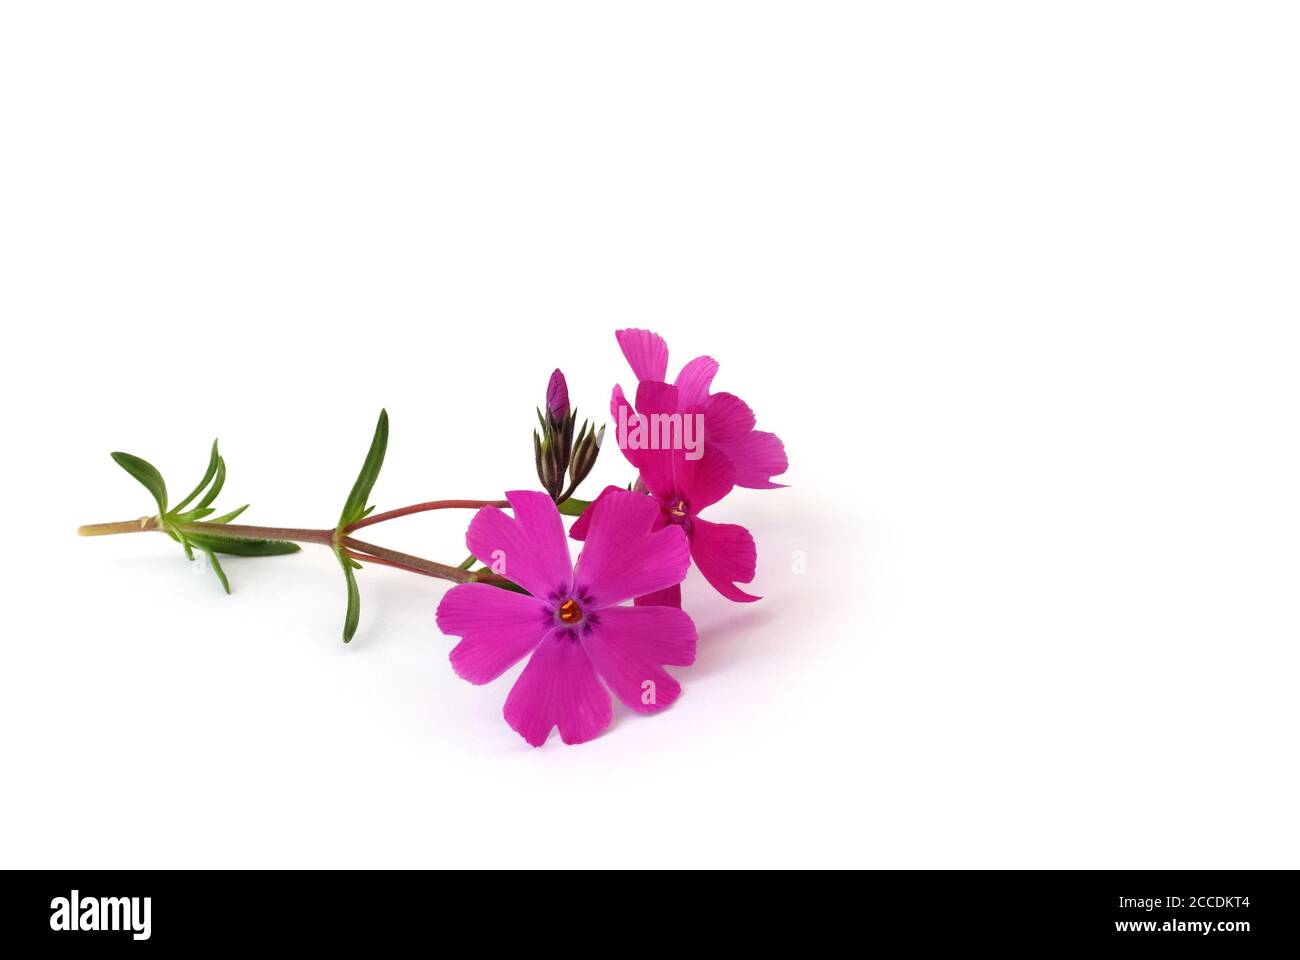 isolated phlox lies on white background Stock Photo